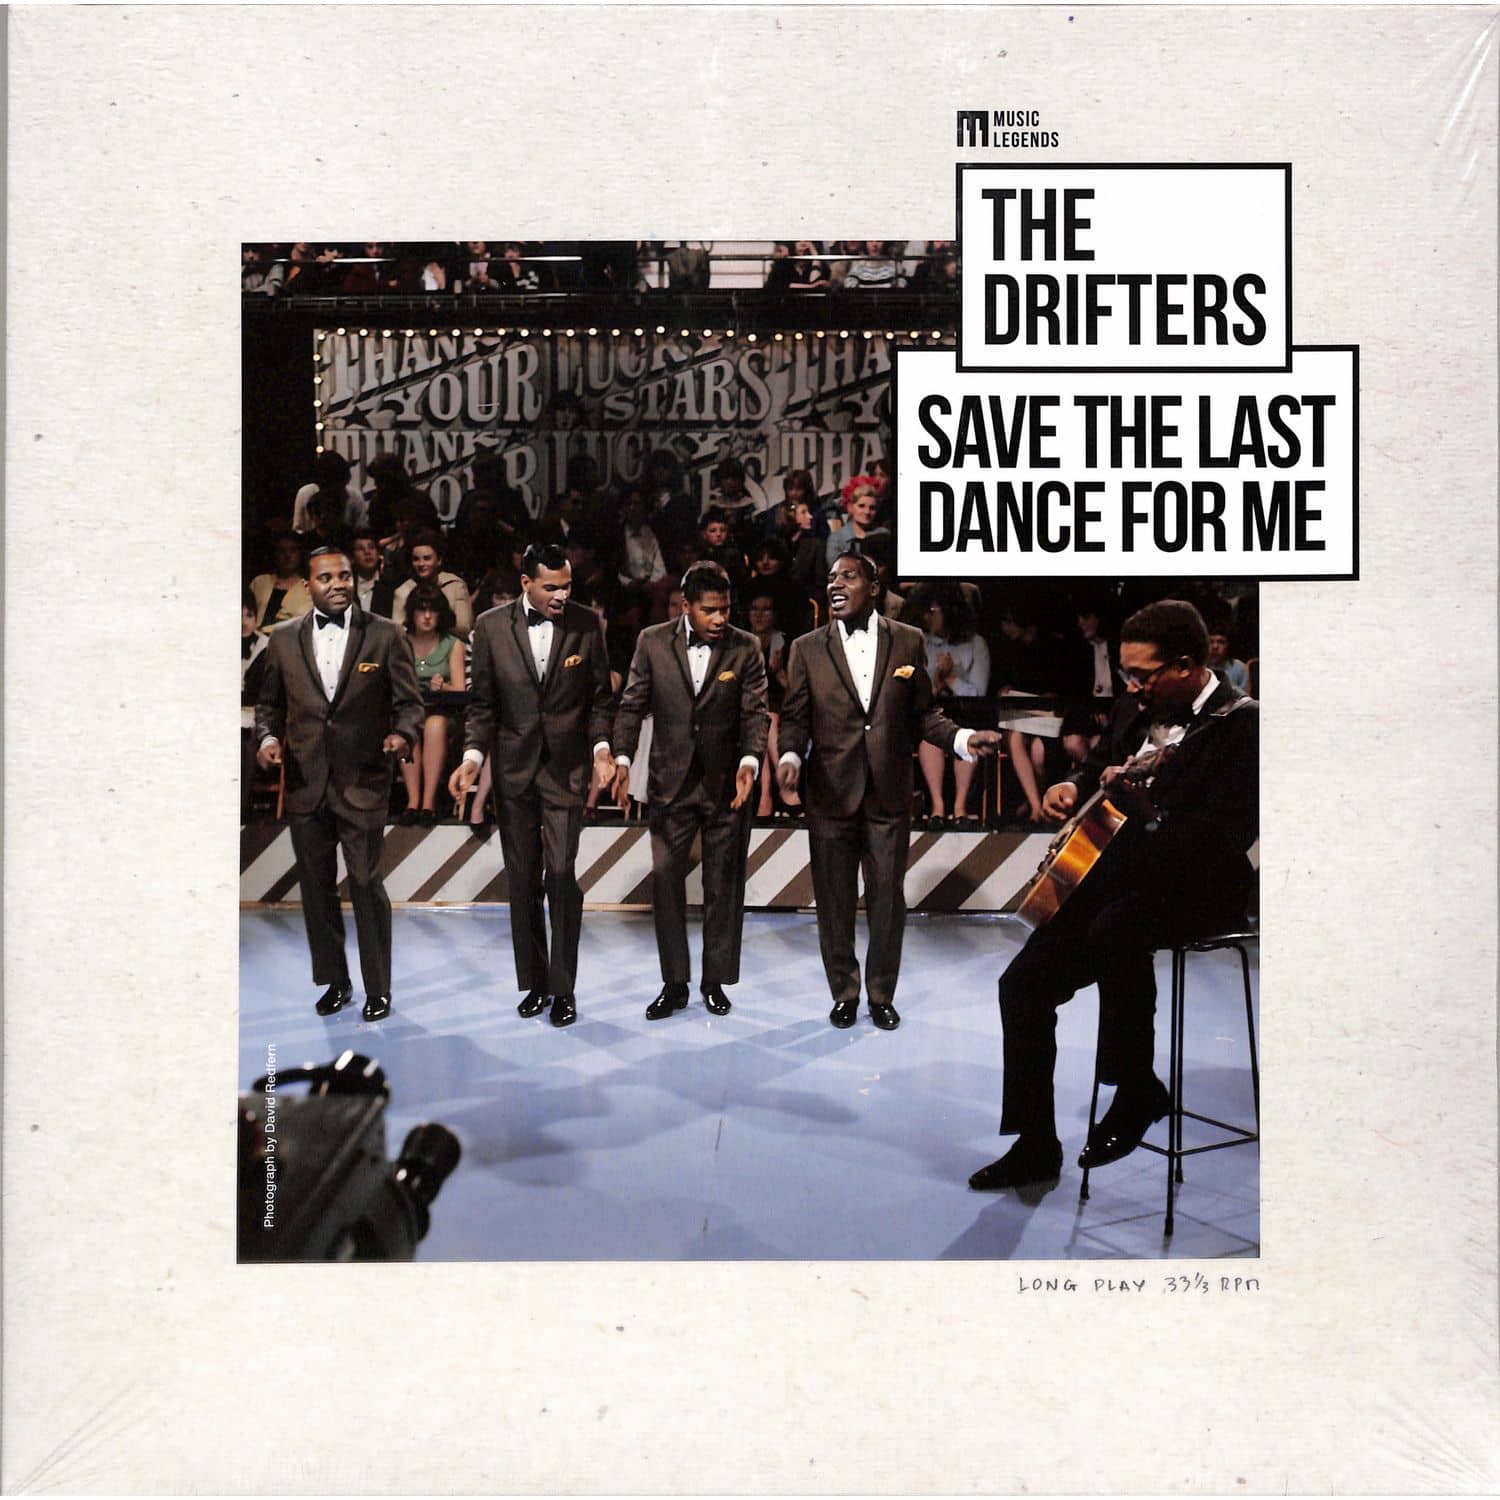 The Drifters - SAVE THE LAST DANCE FOR ME 